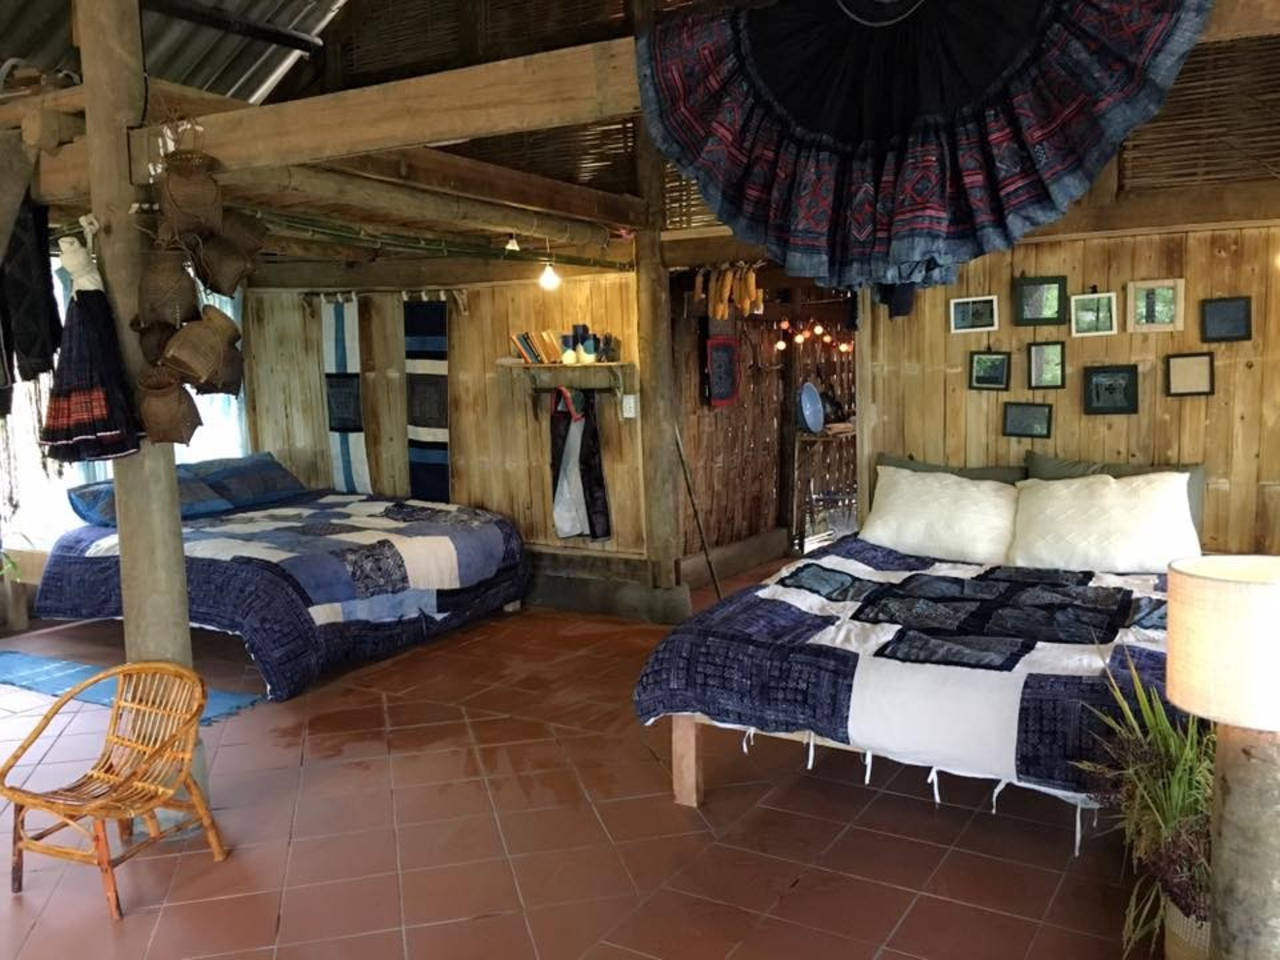 Have you ever experienced any of the best Sapa homestays?